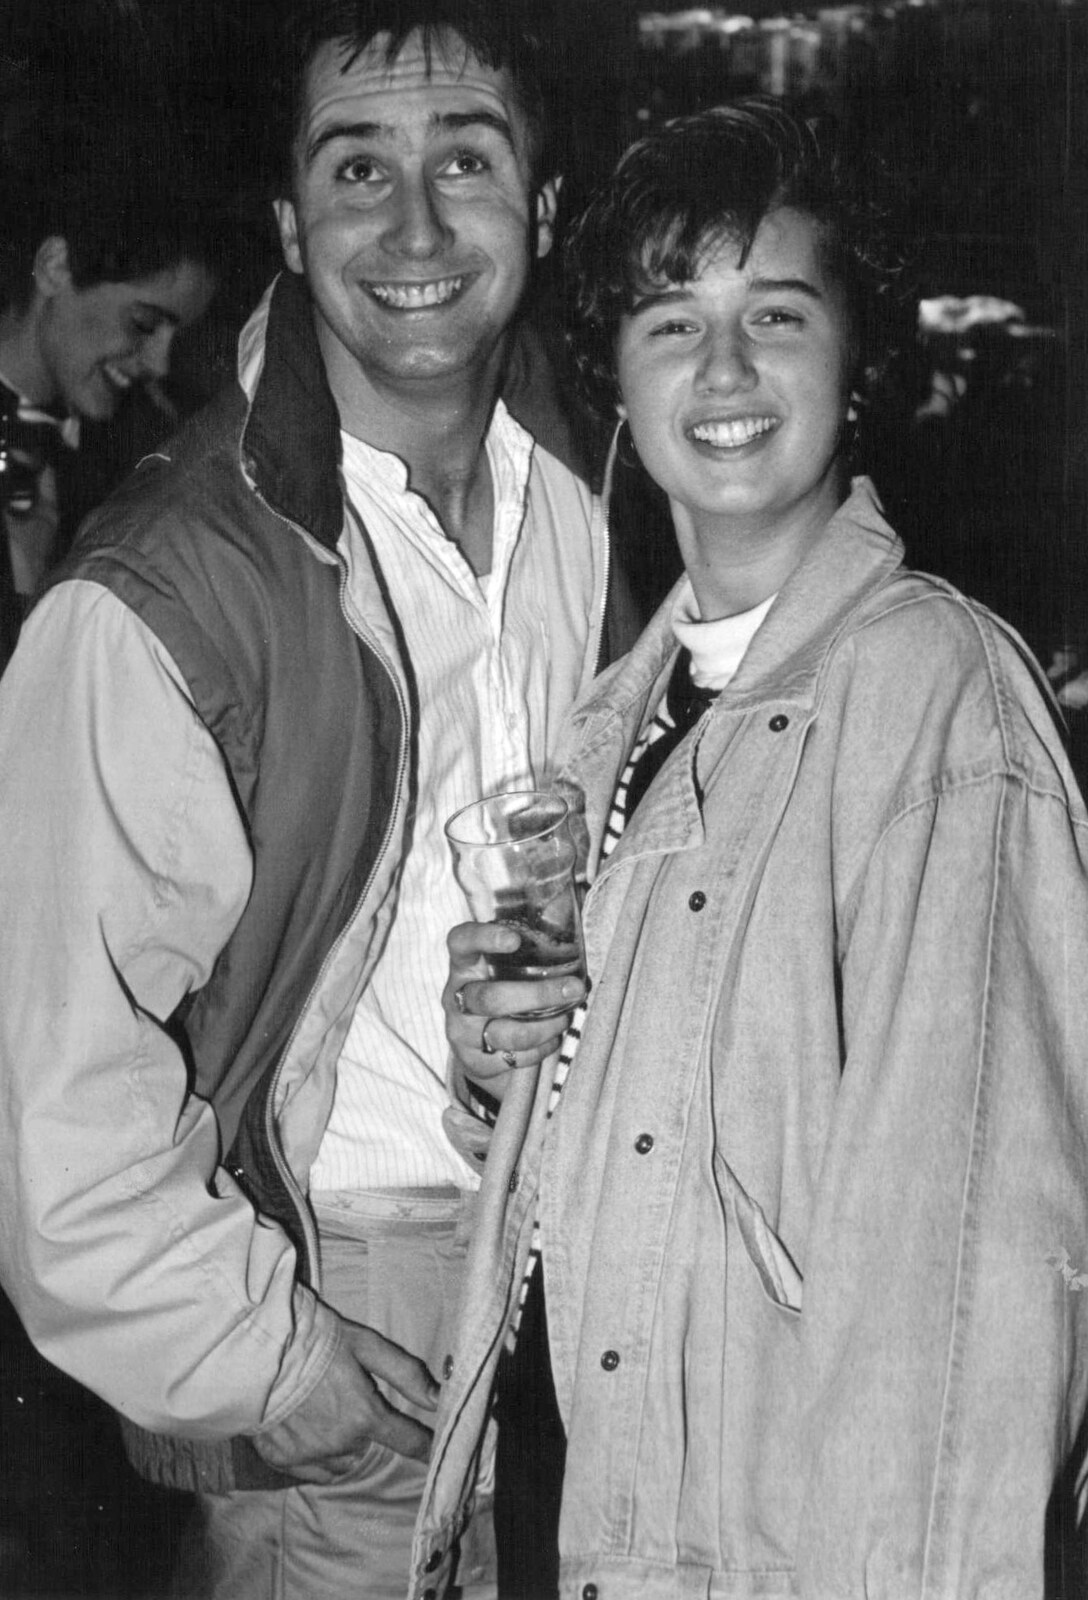 Rik and his sister - Cath the Fish from Uni: The First Year in Black and White, Plymouth Polytechnic, Devon - 8th April 1986